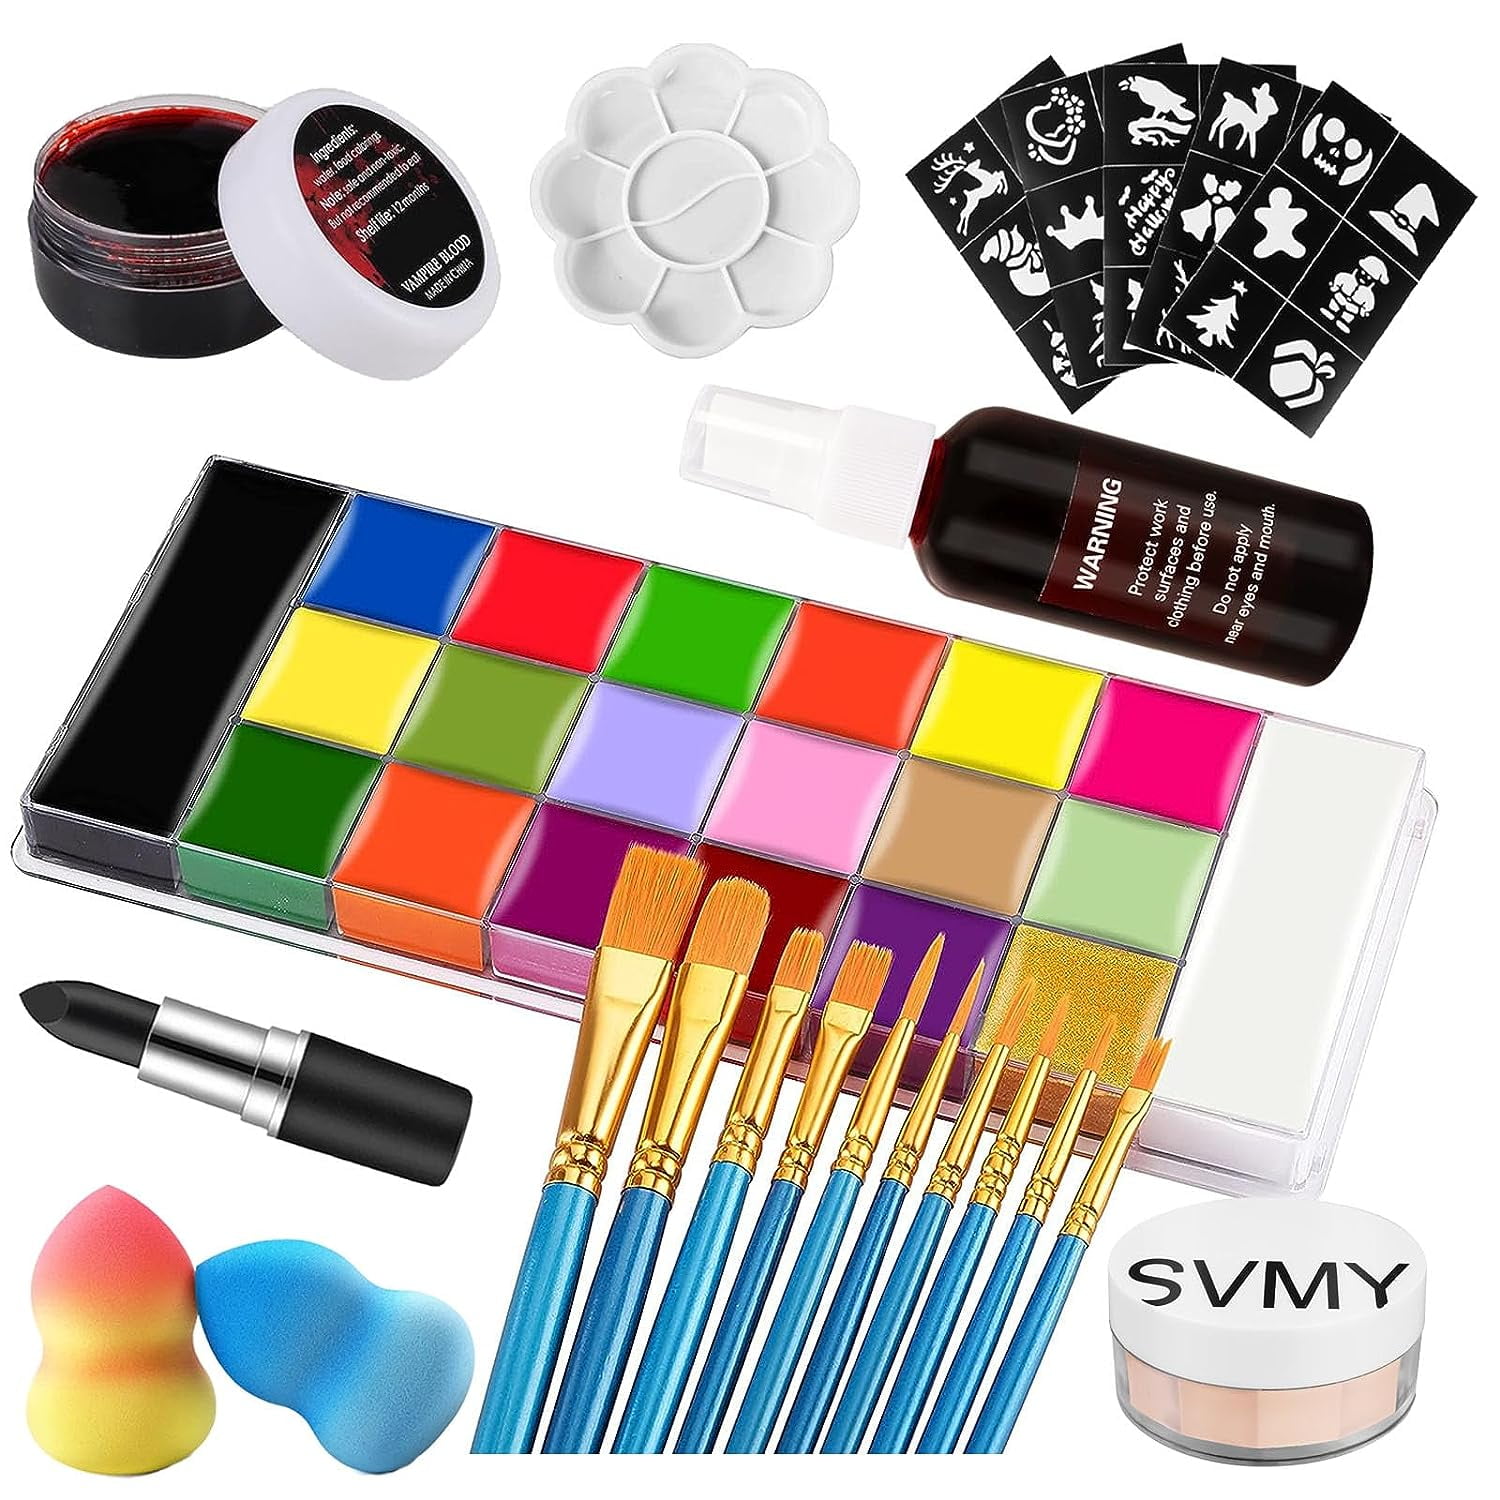 Athena Face Body Paint Oil Makeup Set, 20 Colors FX Halloween Party  Painting with Mixing Palette and Brushes, Tattoo Stencil Arts Crafts Kit  for Face